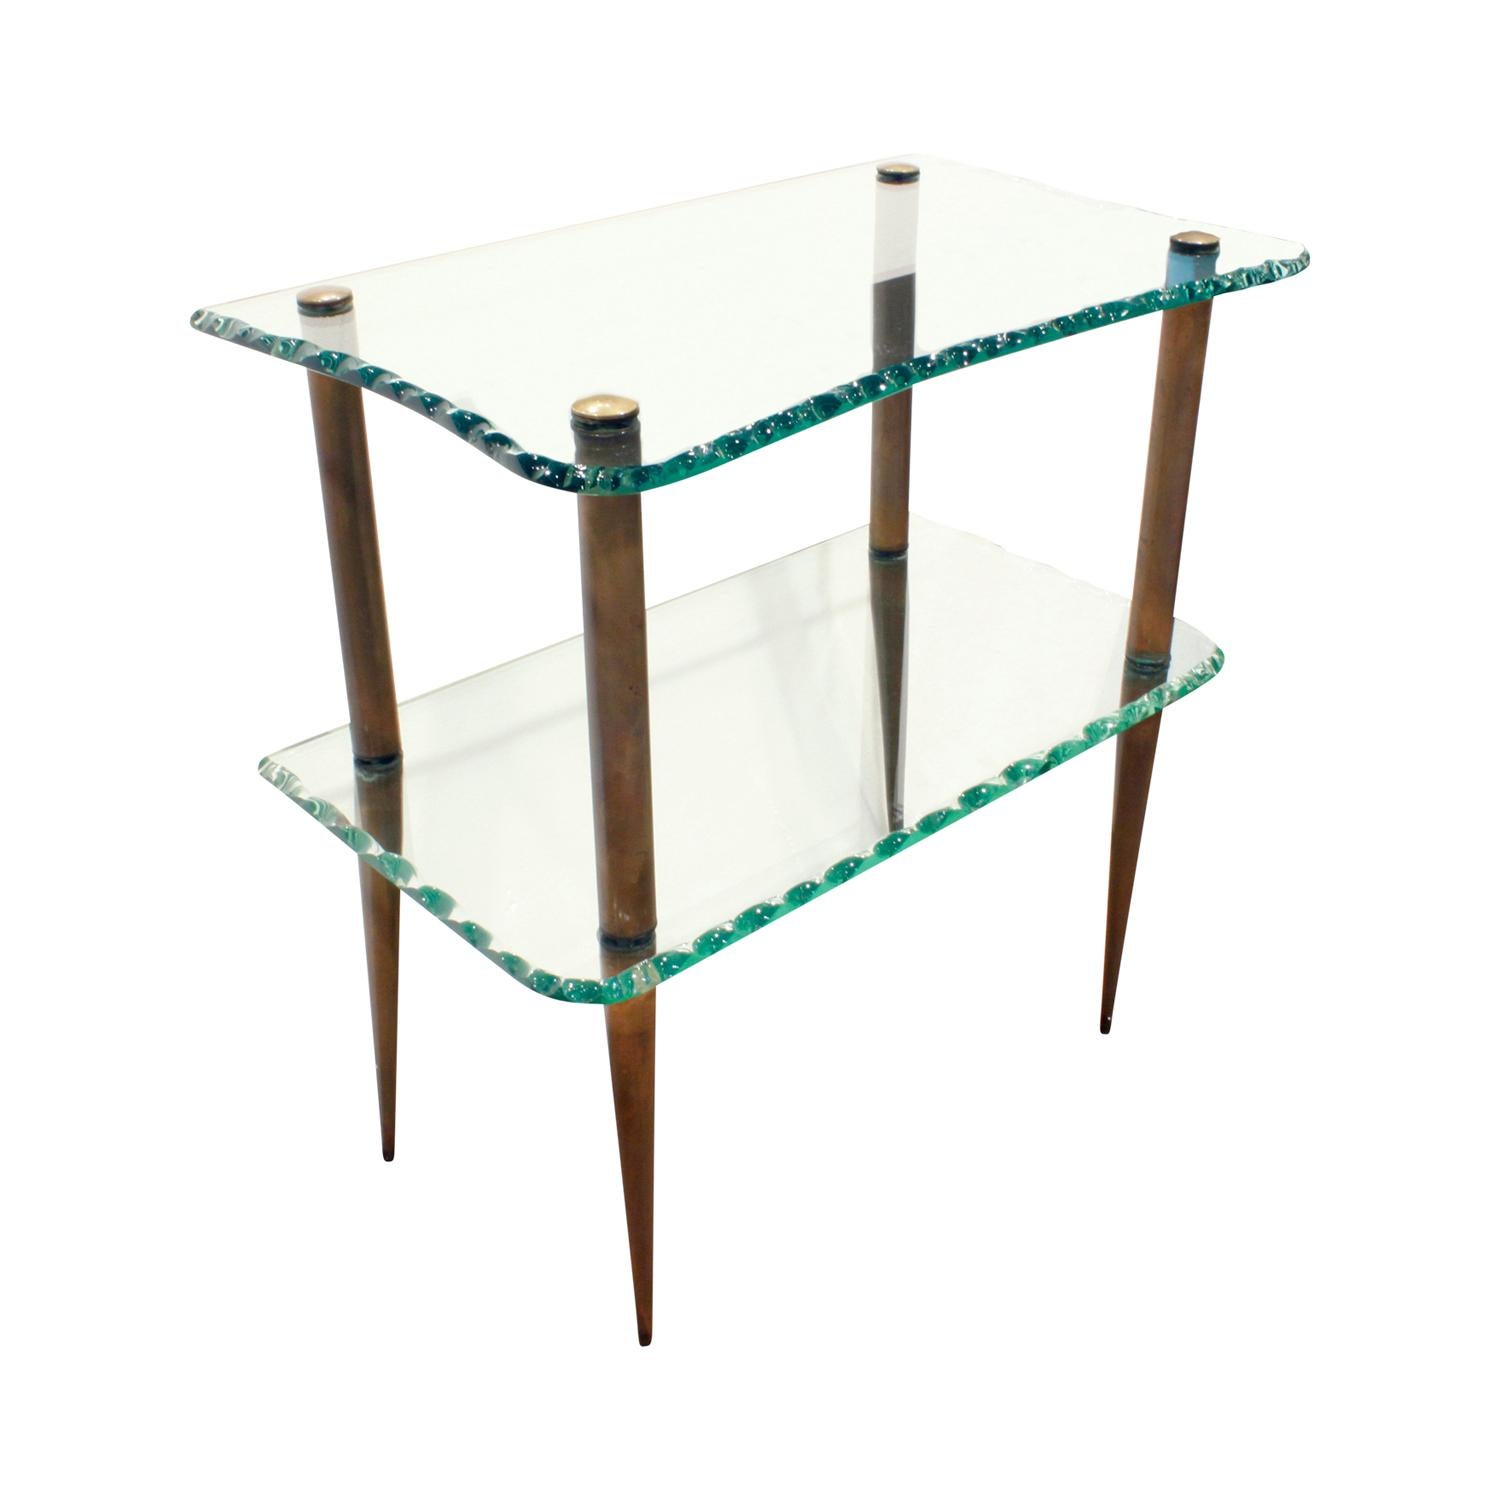 Elegant 2-tier console table with artisan crafted glass and brass tapering legs, Italian, 1950s.  This piece is absolutely stunning and would be a wonderful accent table in any room.